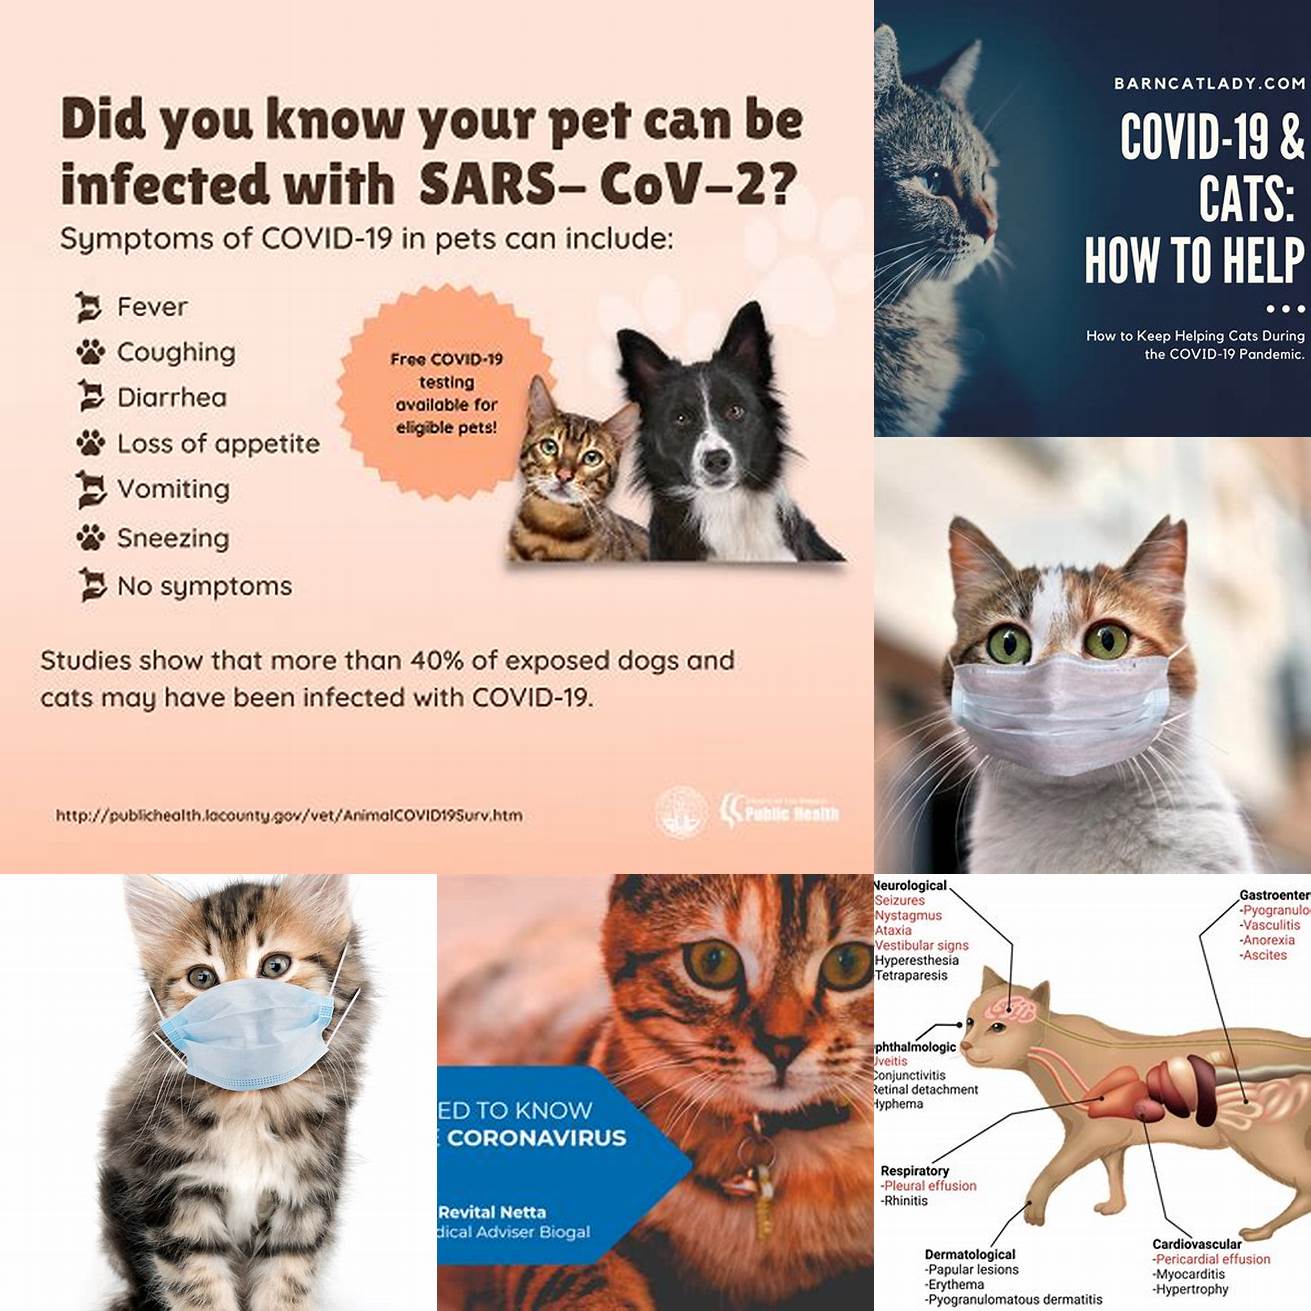 What are the symptoms of COVID-19 in cats